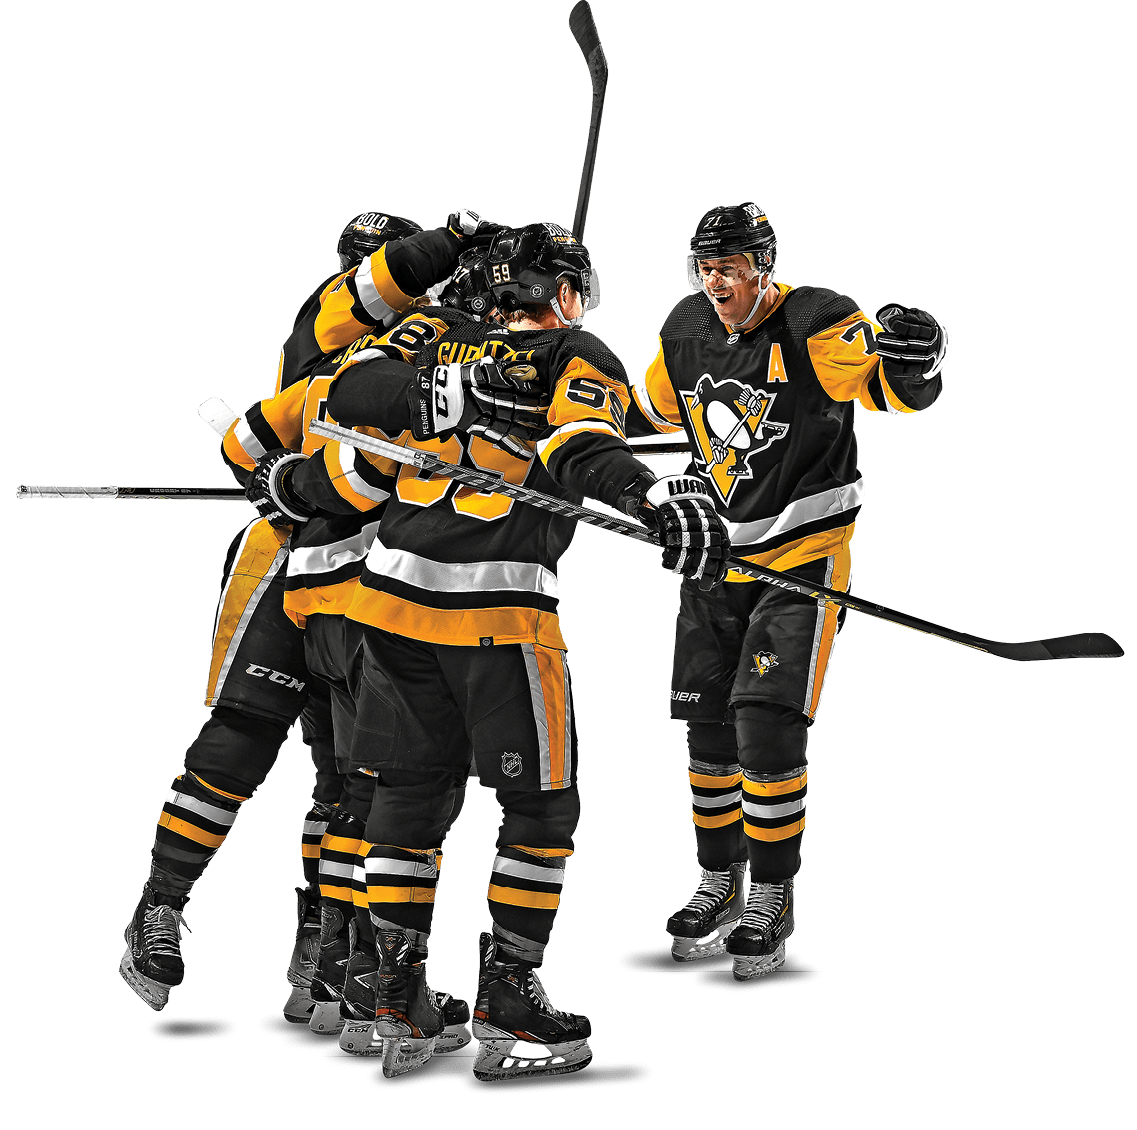 February 15, 2022 - Pittsburgh Penguins vs Philadelphia Flyers at PPG Paints Arena  Pittsburgh won the game 5-4 in overtime 